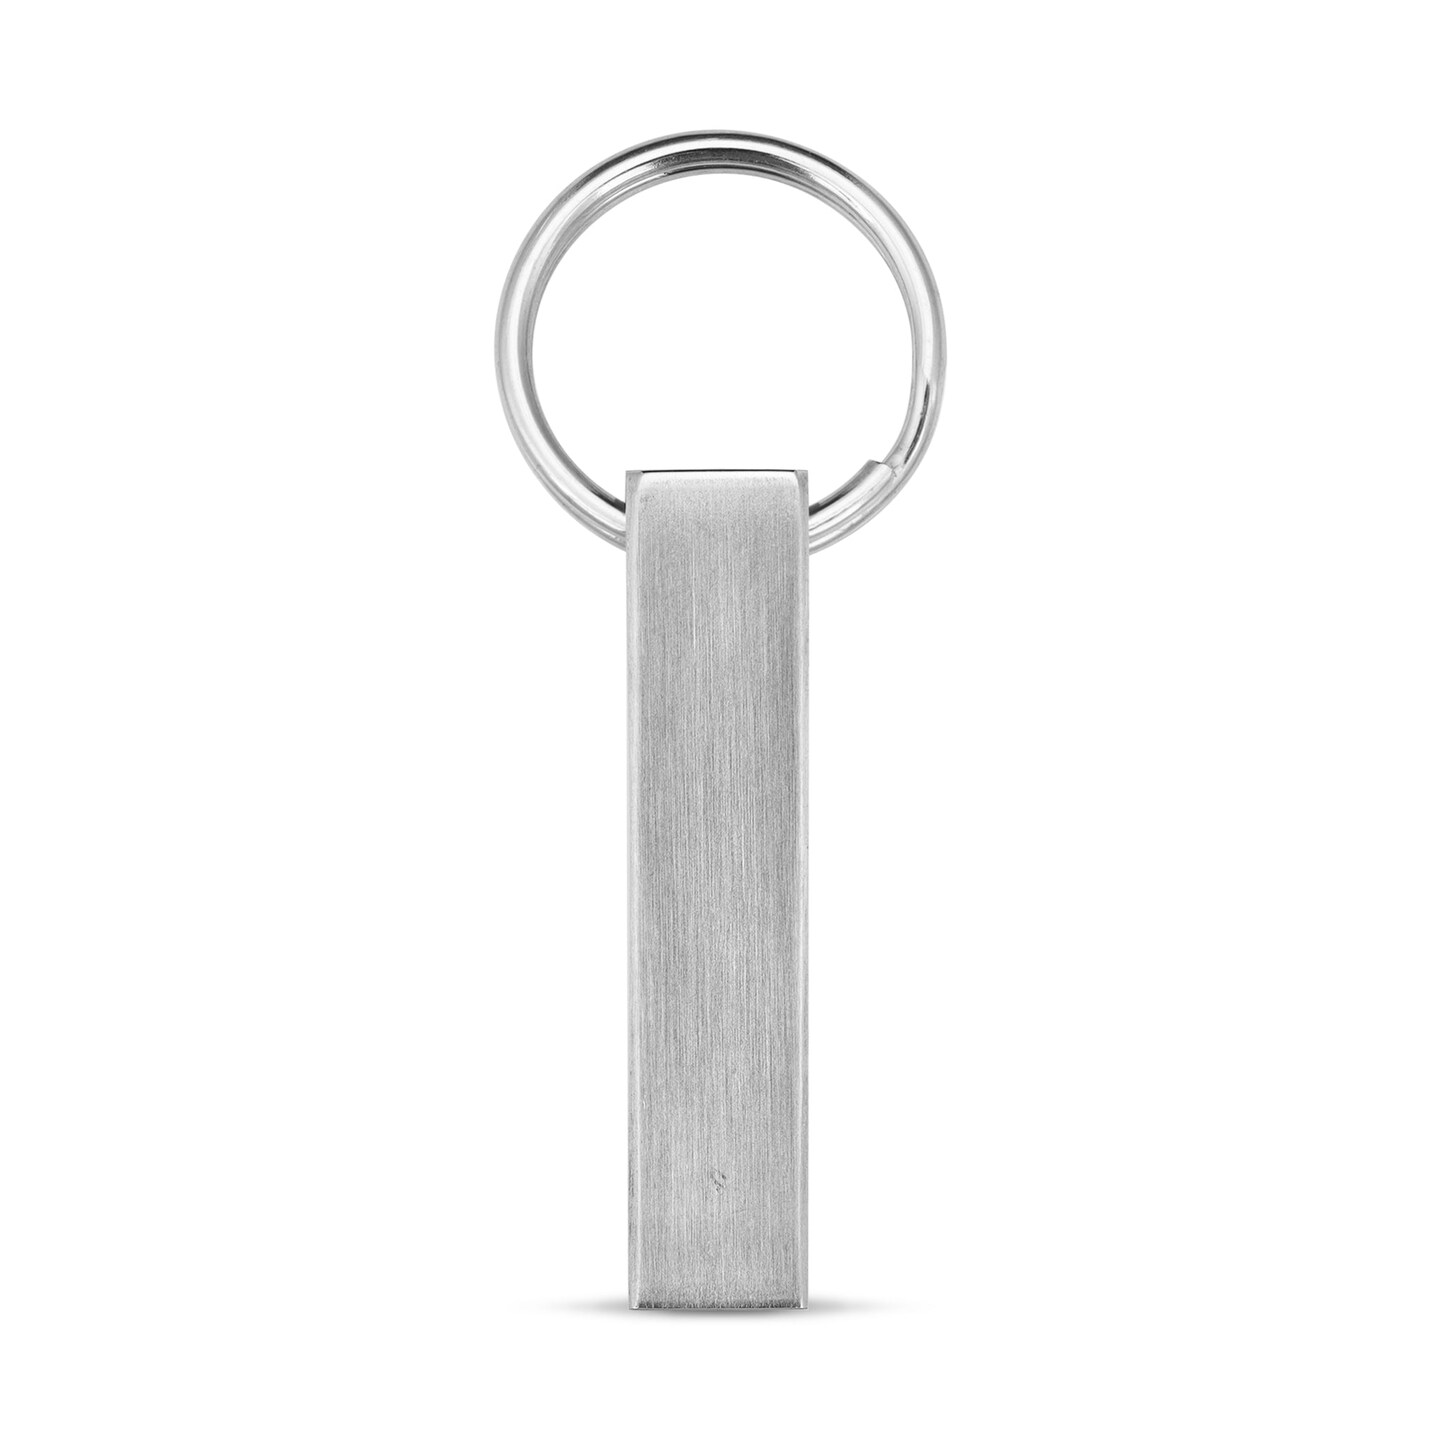 10 Pack - Stainless Steel Blank 4 Sided Keychain